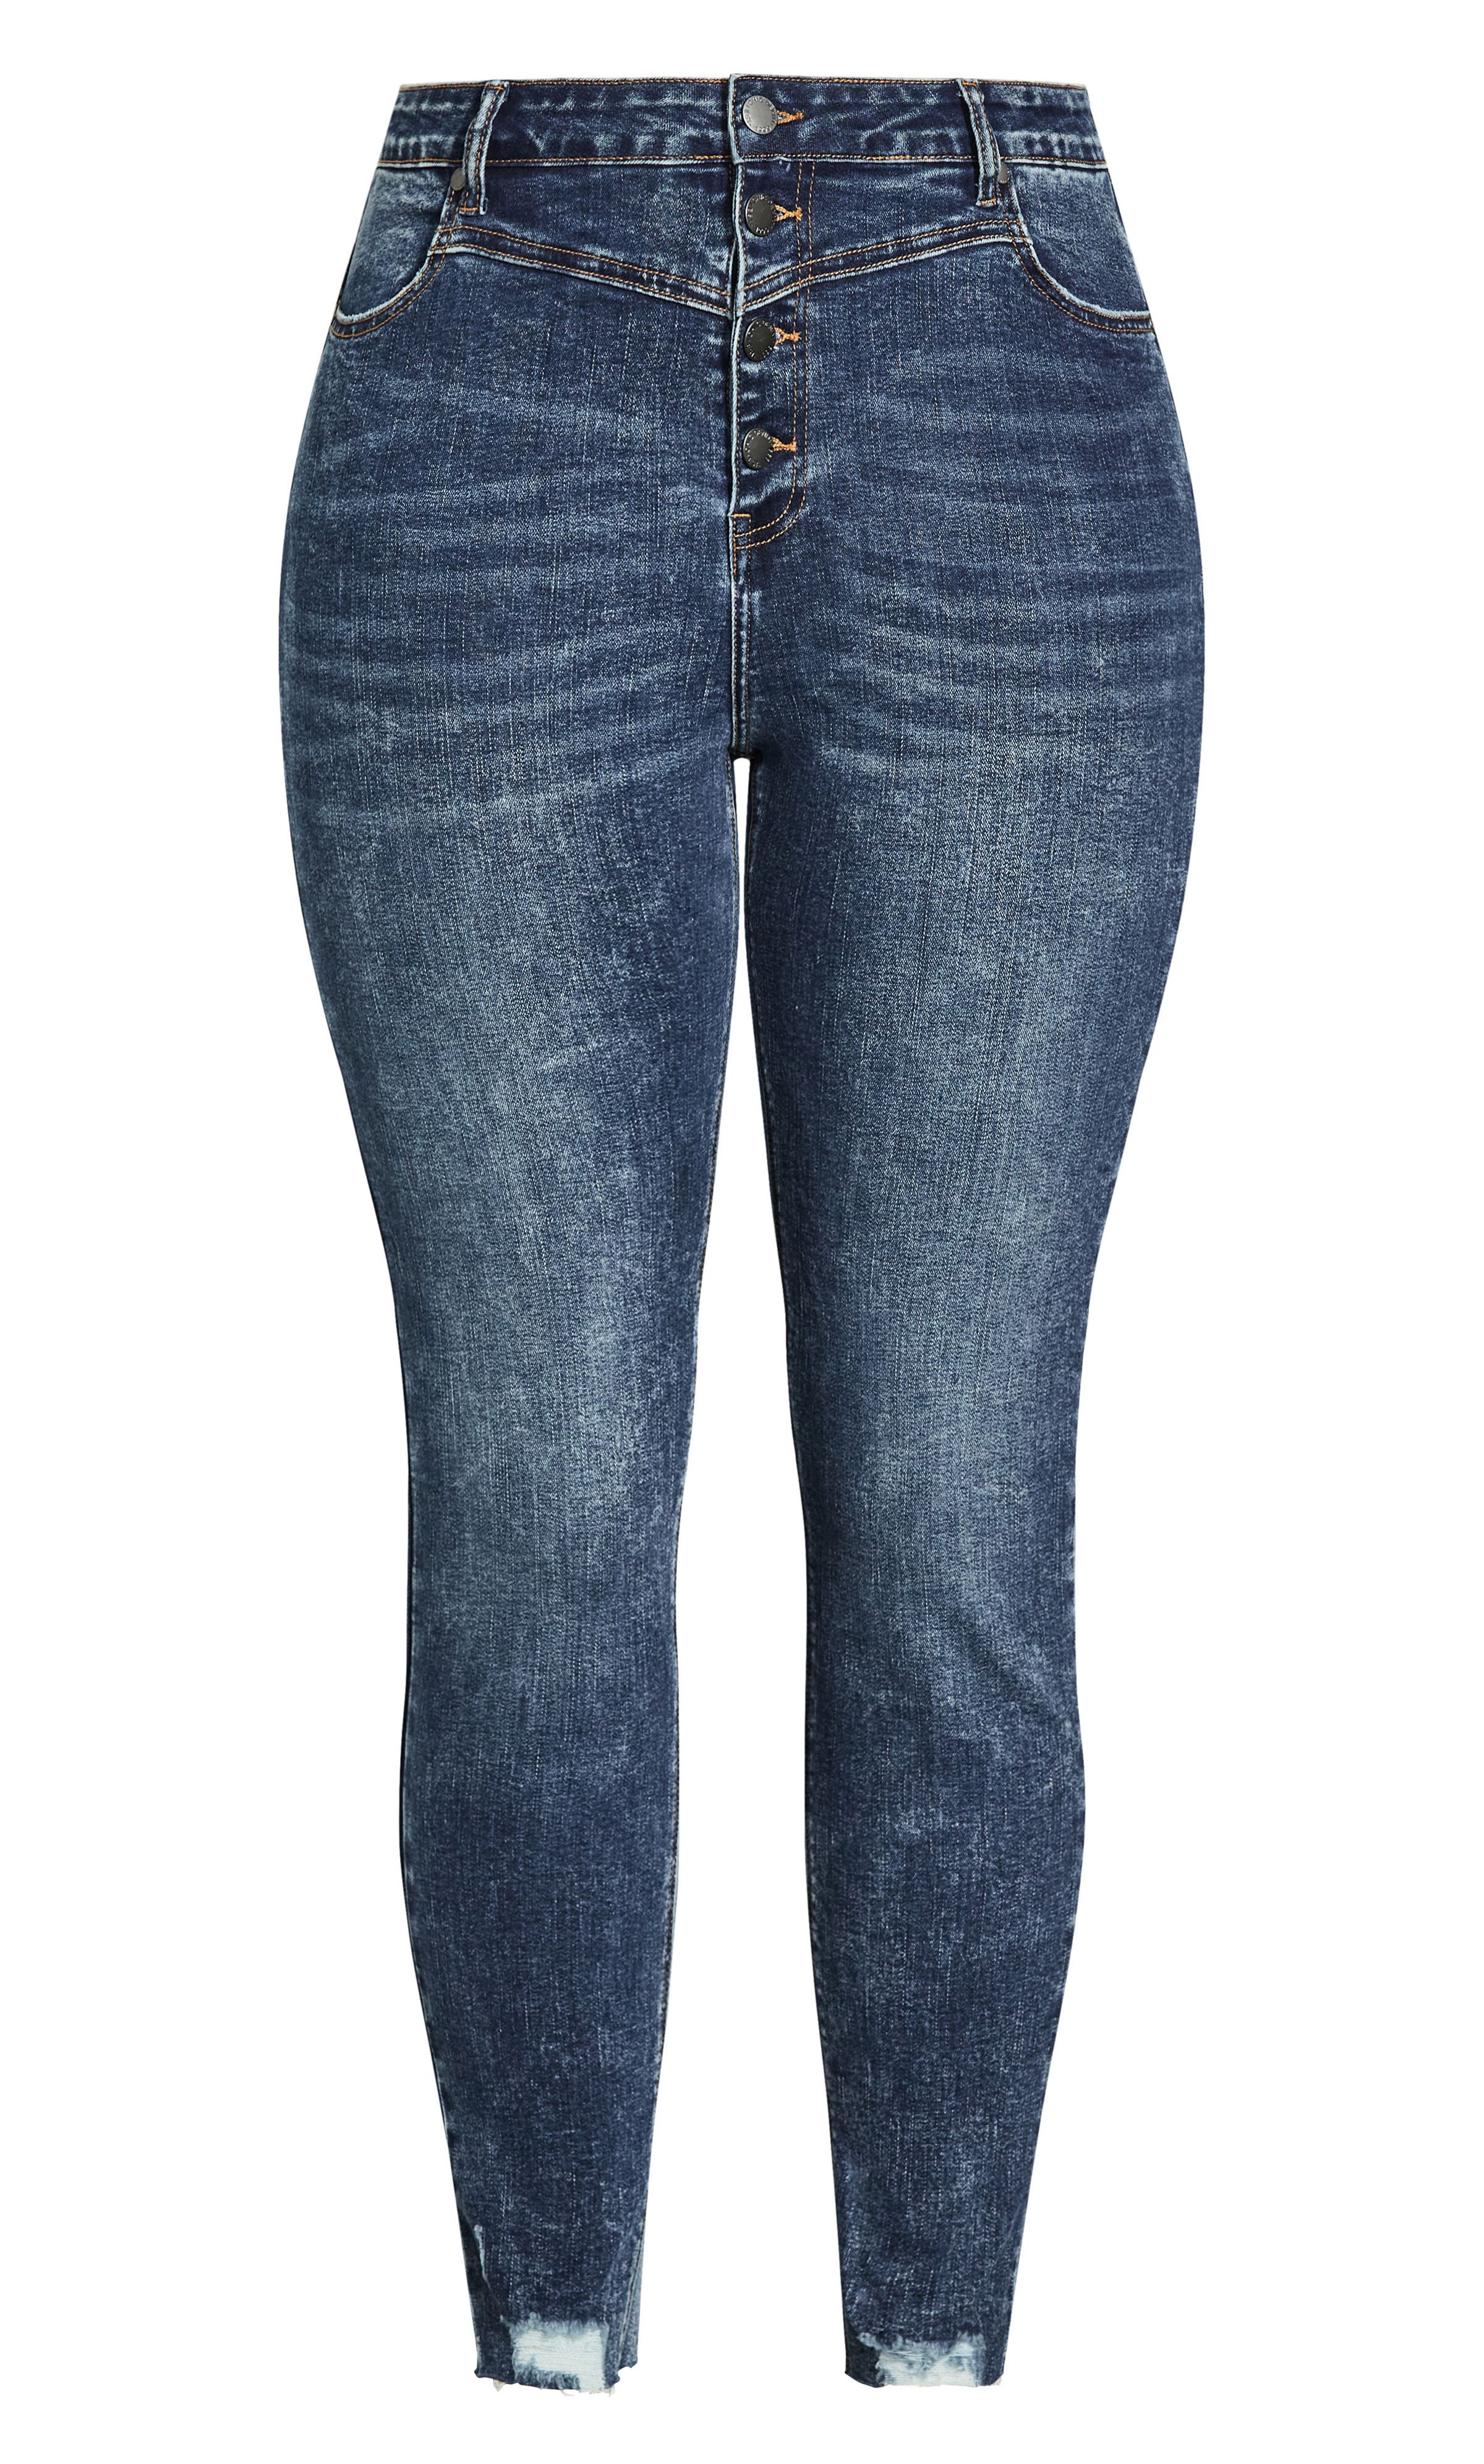 Upstyle your denim collection with the Exposed Button Jean, flaunting a svelte skinny leg and mid rise fit. Elevated by corset detailing to the waist, this stretch fit pair are bound to get some major airtime in your wardrobe! Key Features Include: - Skinny cut leg - 360 Technology stretch washed denim - High denim fibre retention to maintain shape - Signature Chic Denim hardware throughout zips, buttons and rivets - Mid rise - Wide belt looped waistband - Button fastening - Functional front and back pocket denim styling - Frayed hem - Ankle grazer Level up your party look with strappy heels and streamlined bodysuit.